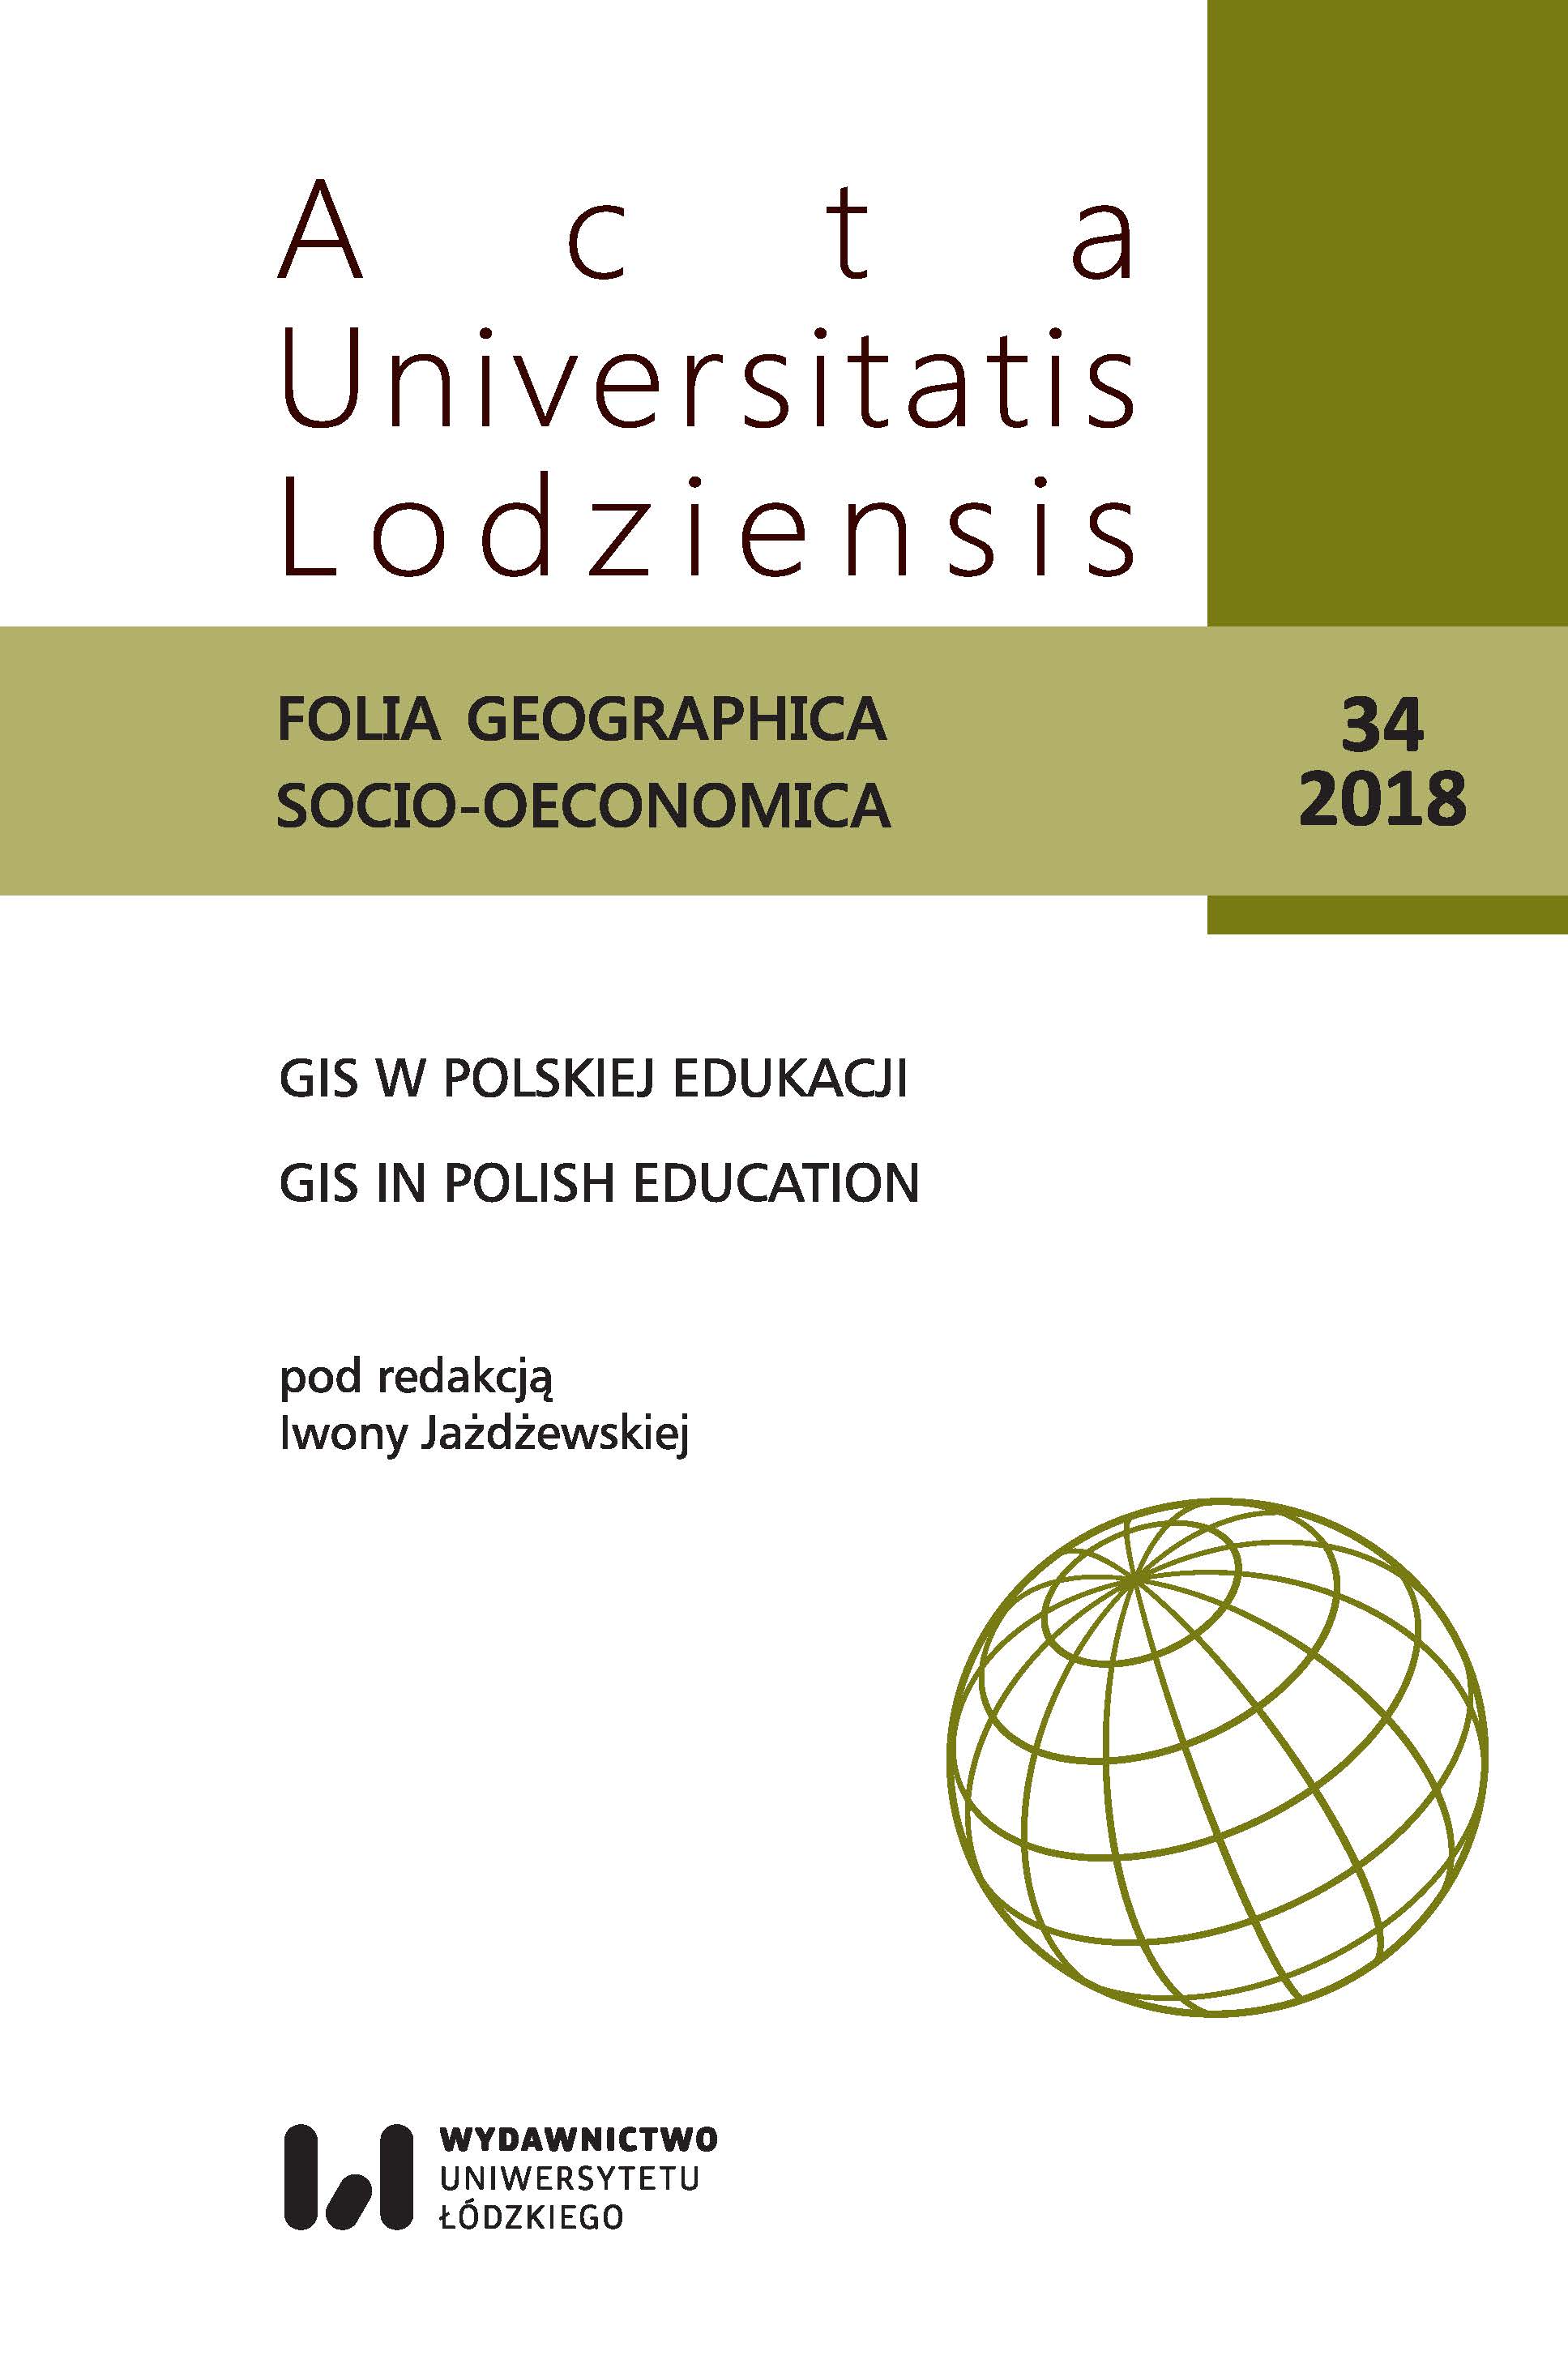 Education in geoinformation and geoinformatics at selected universities in Poland Cover Image